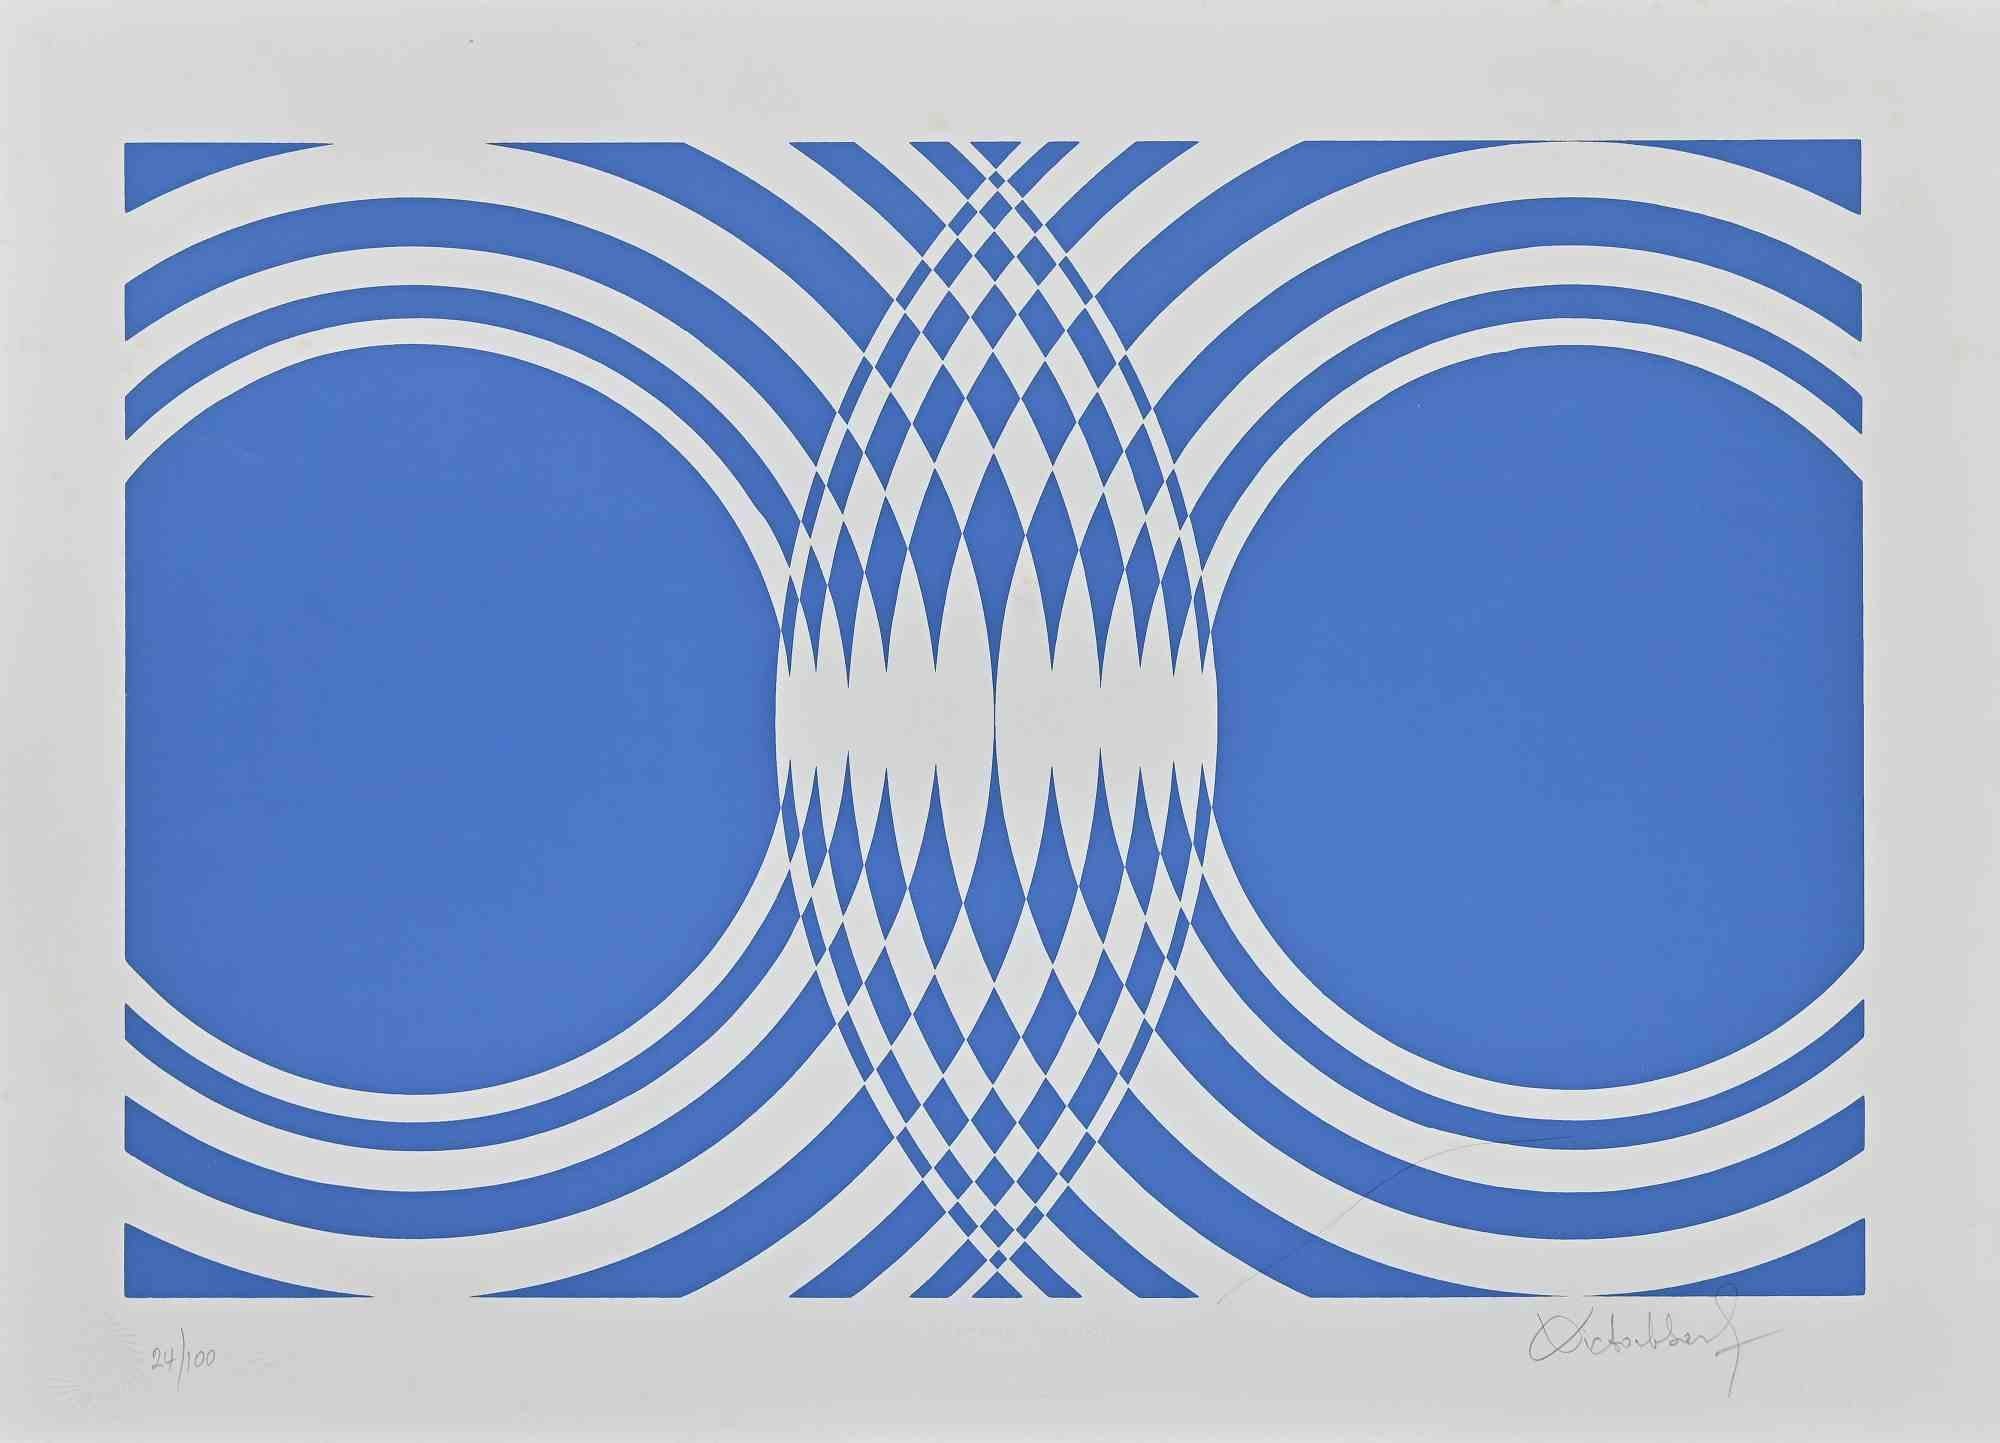 Blue Composition is an original contemporary artwork realized by Victor Debach in the 1970s.

Mixed colored screen print on paper.

Hand signed on the lower right margin.

Numbered on the lower left.

Edition of 24/100